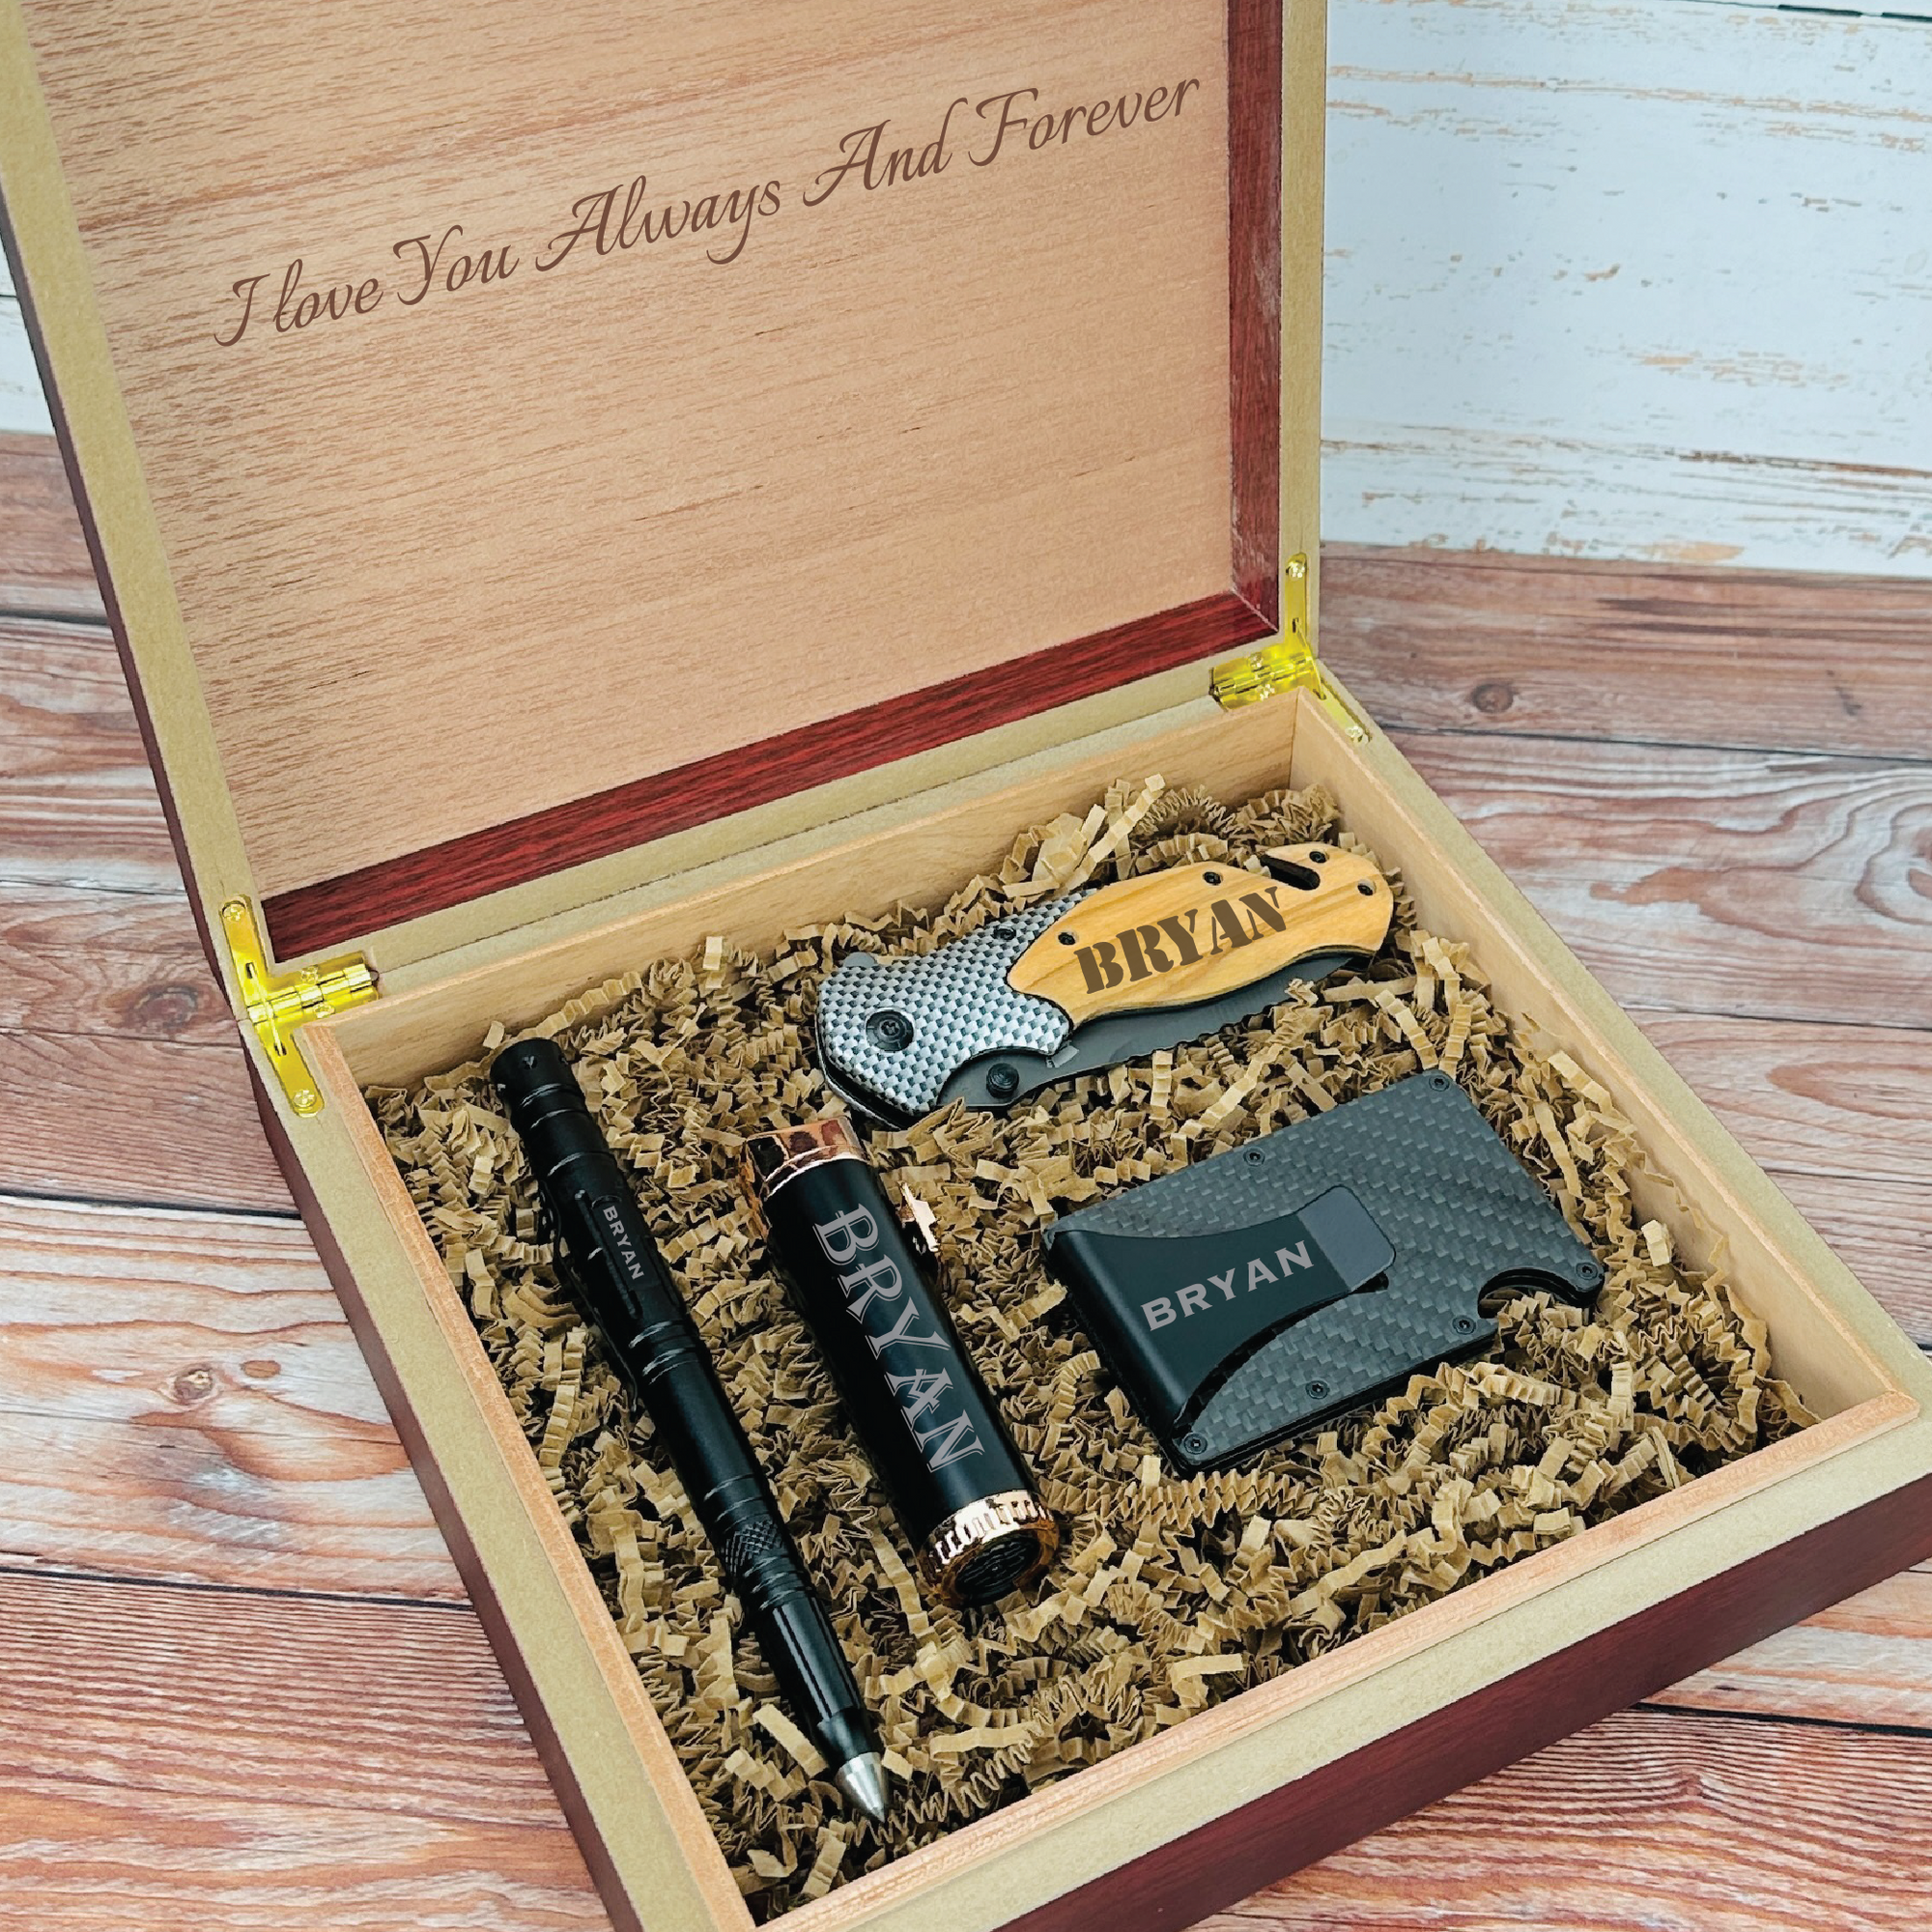 81 Meaningful Anniversary Gifts for Him - Groovy Guy Gifts